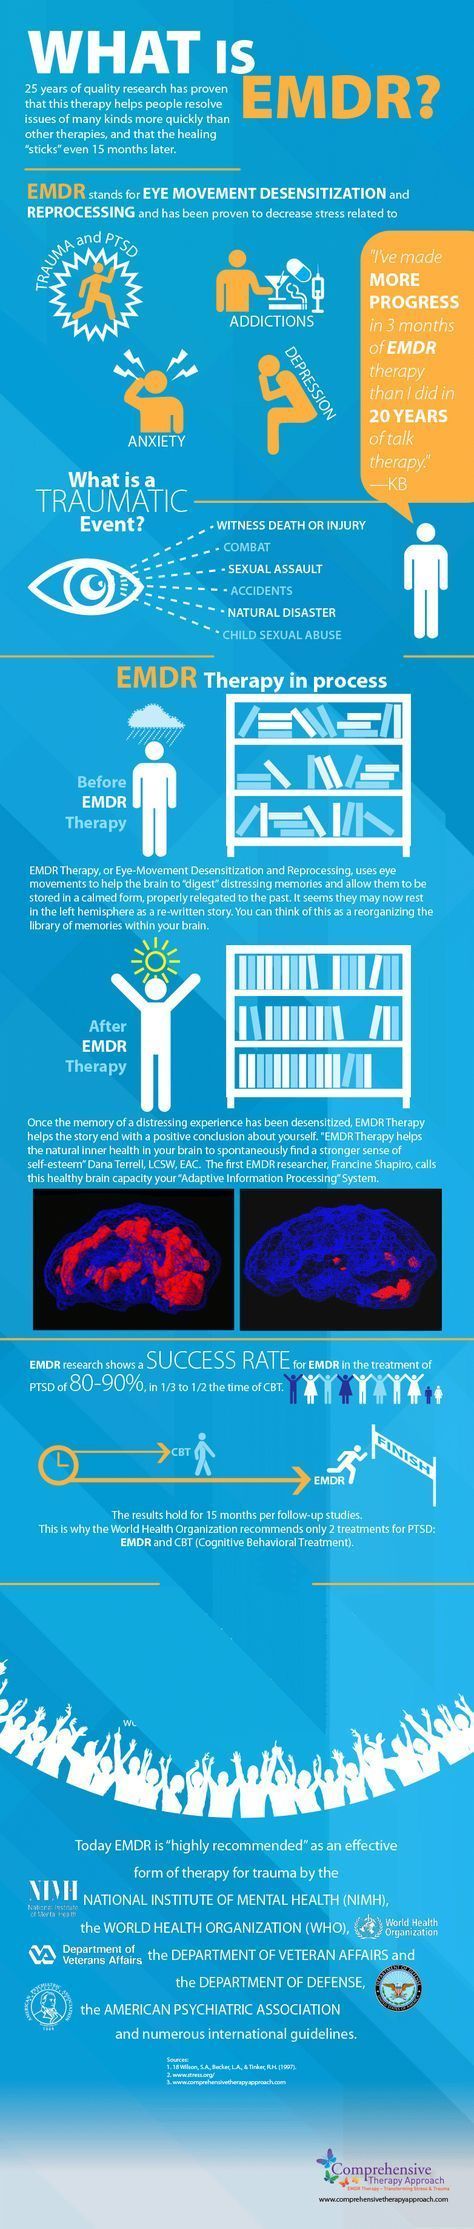 Psychology-Infographic-Home-Page-EMDR-Lebanon-Association Psychology Infographic : Home Page | EMDR Lebanon Association